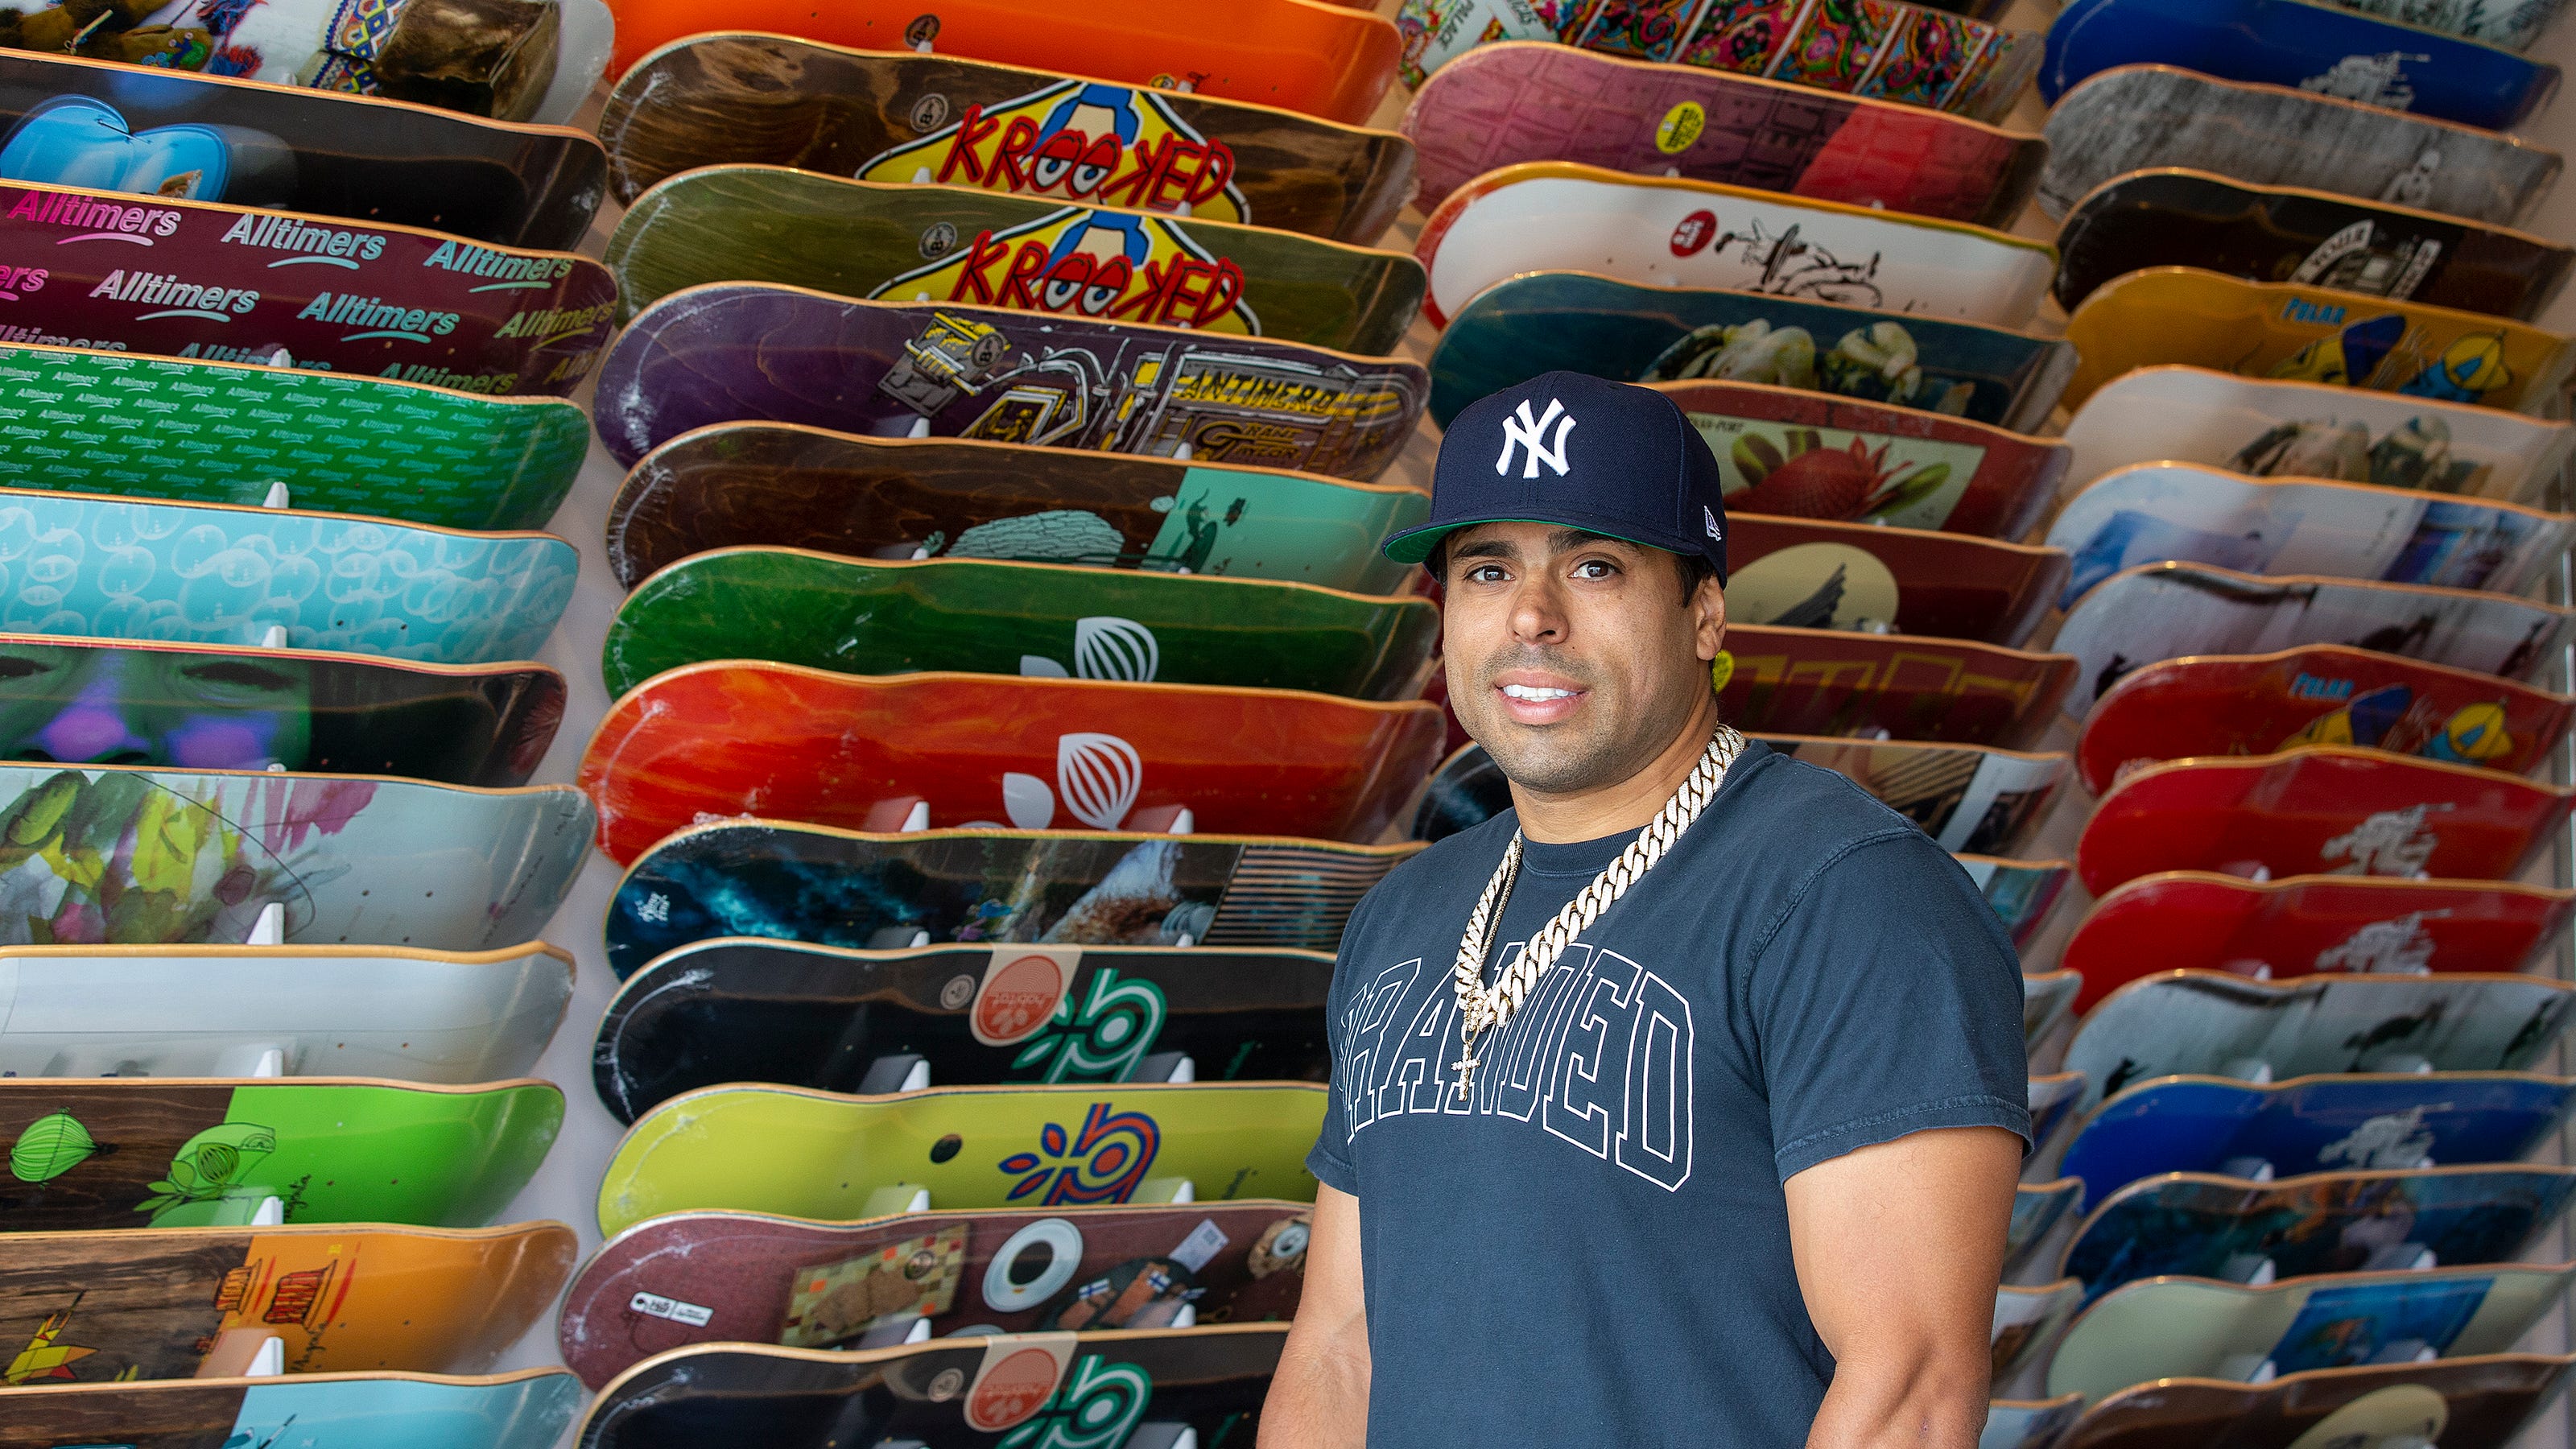 radioactiviteit Boos Rauw Branded Skate Shop in Long Branch: Built by love of sneakers, skateboards